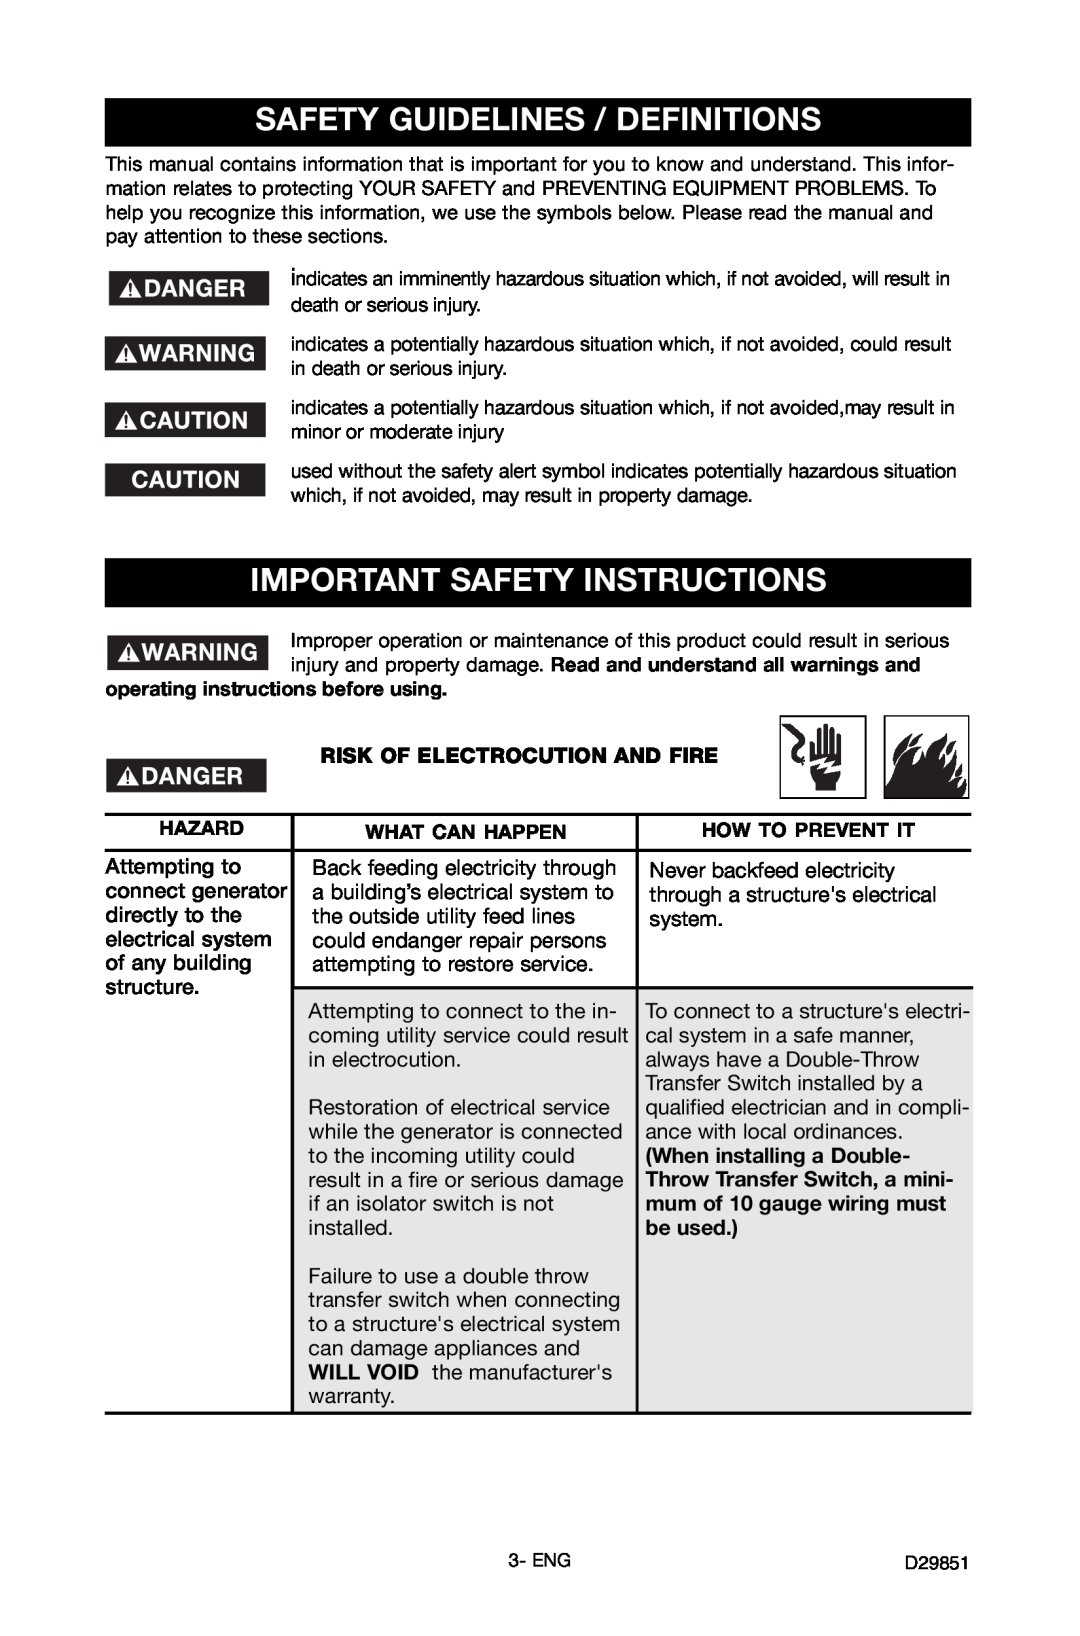 Porter-Cable D29851-038-0 Safety Guidelines / Definitions, Important Safety Instructions, Hazard, What Can Happen, be used 